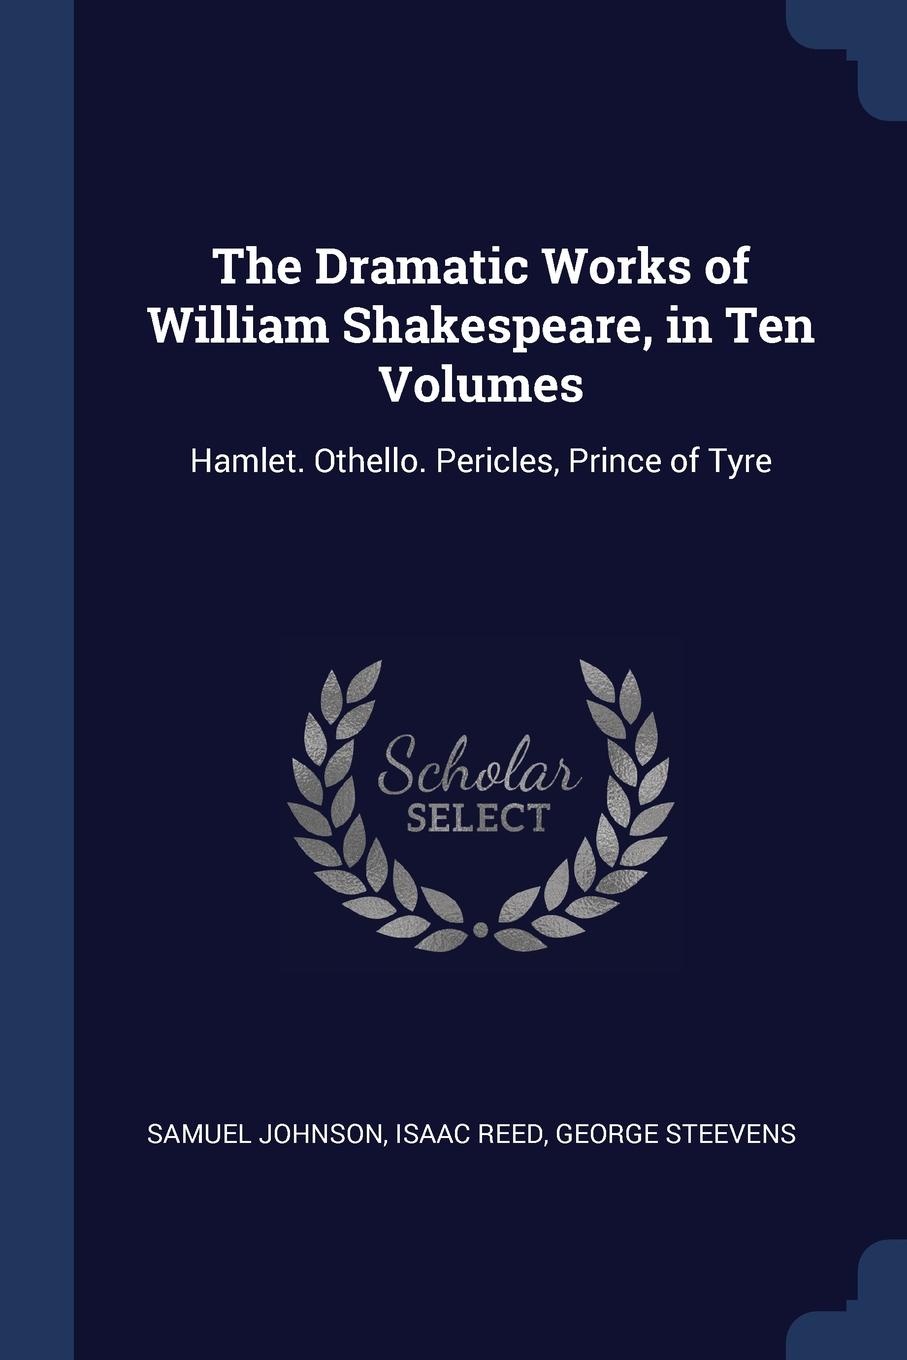 The Dramatic Works of William Shakespeare, in Ten Volumes. Hamlet. Othello. Pericles, Prince of Tyre